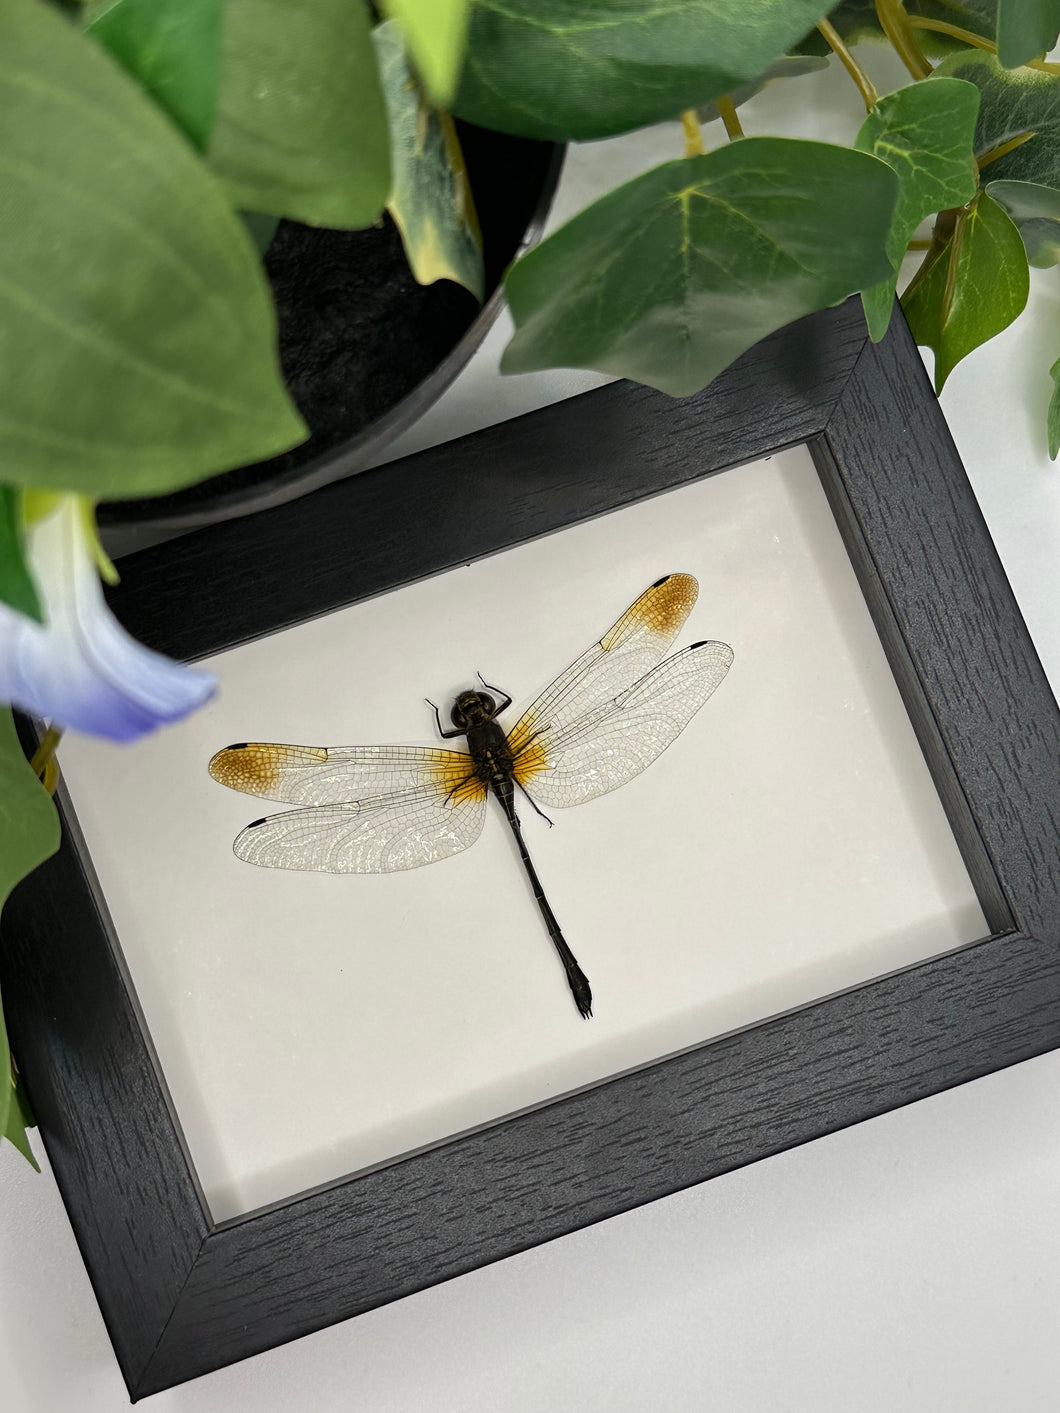 Java Dragonfly sp. in a frame